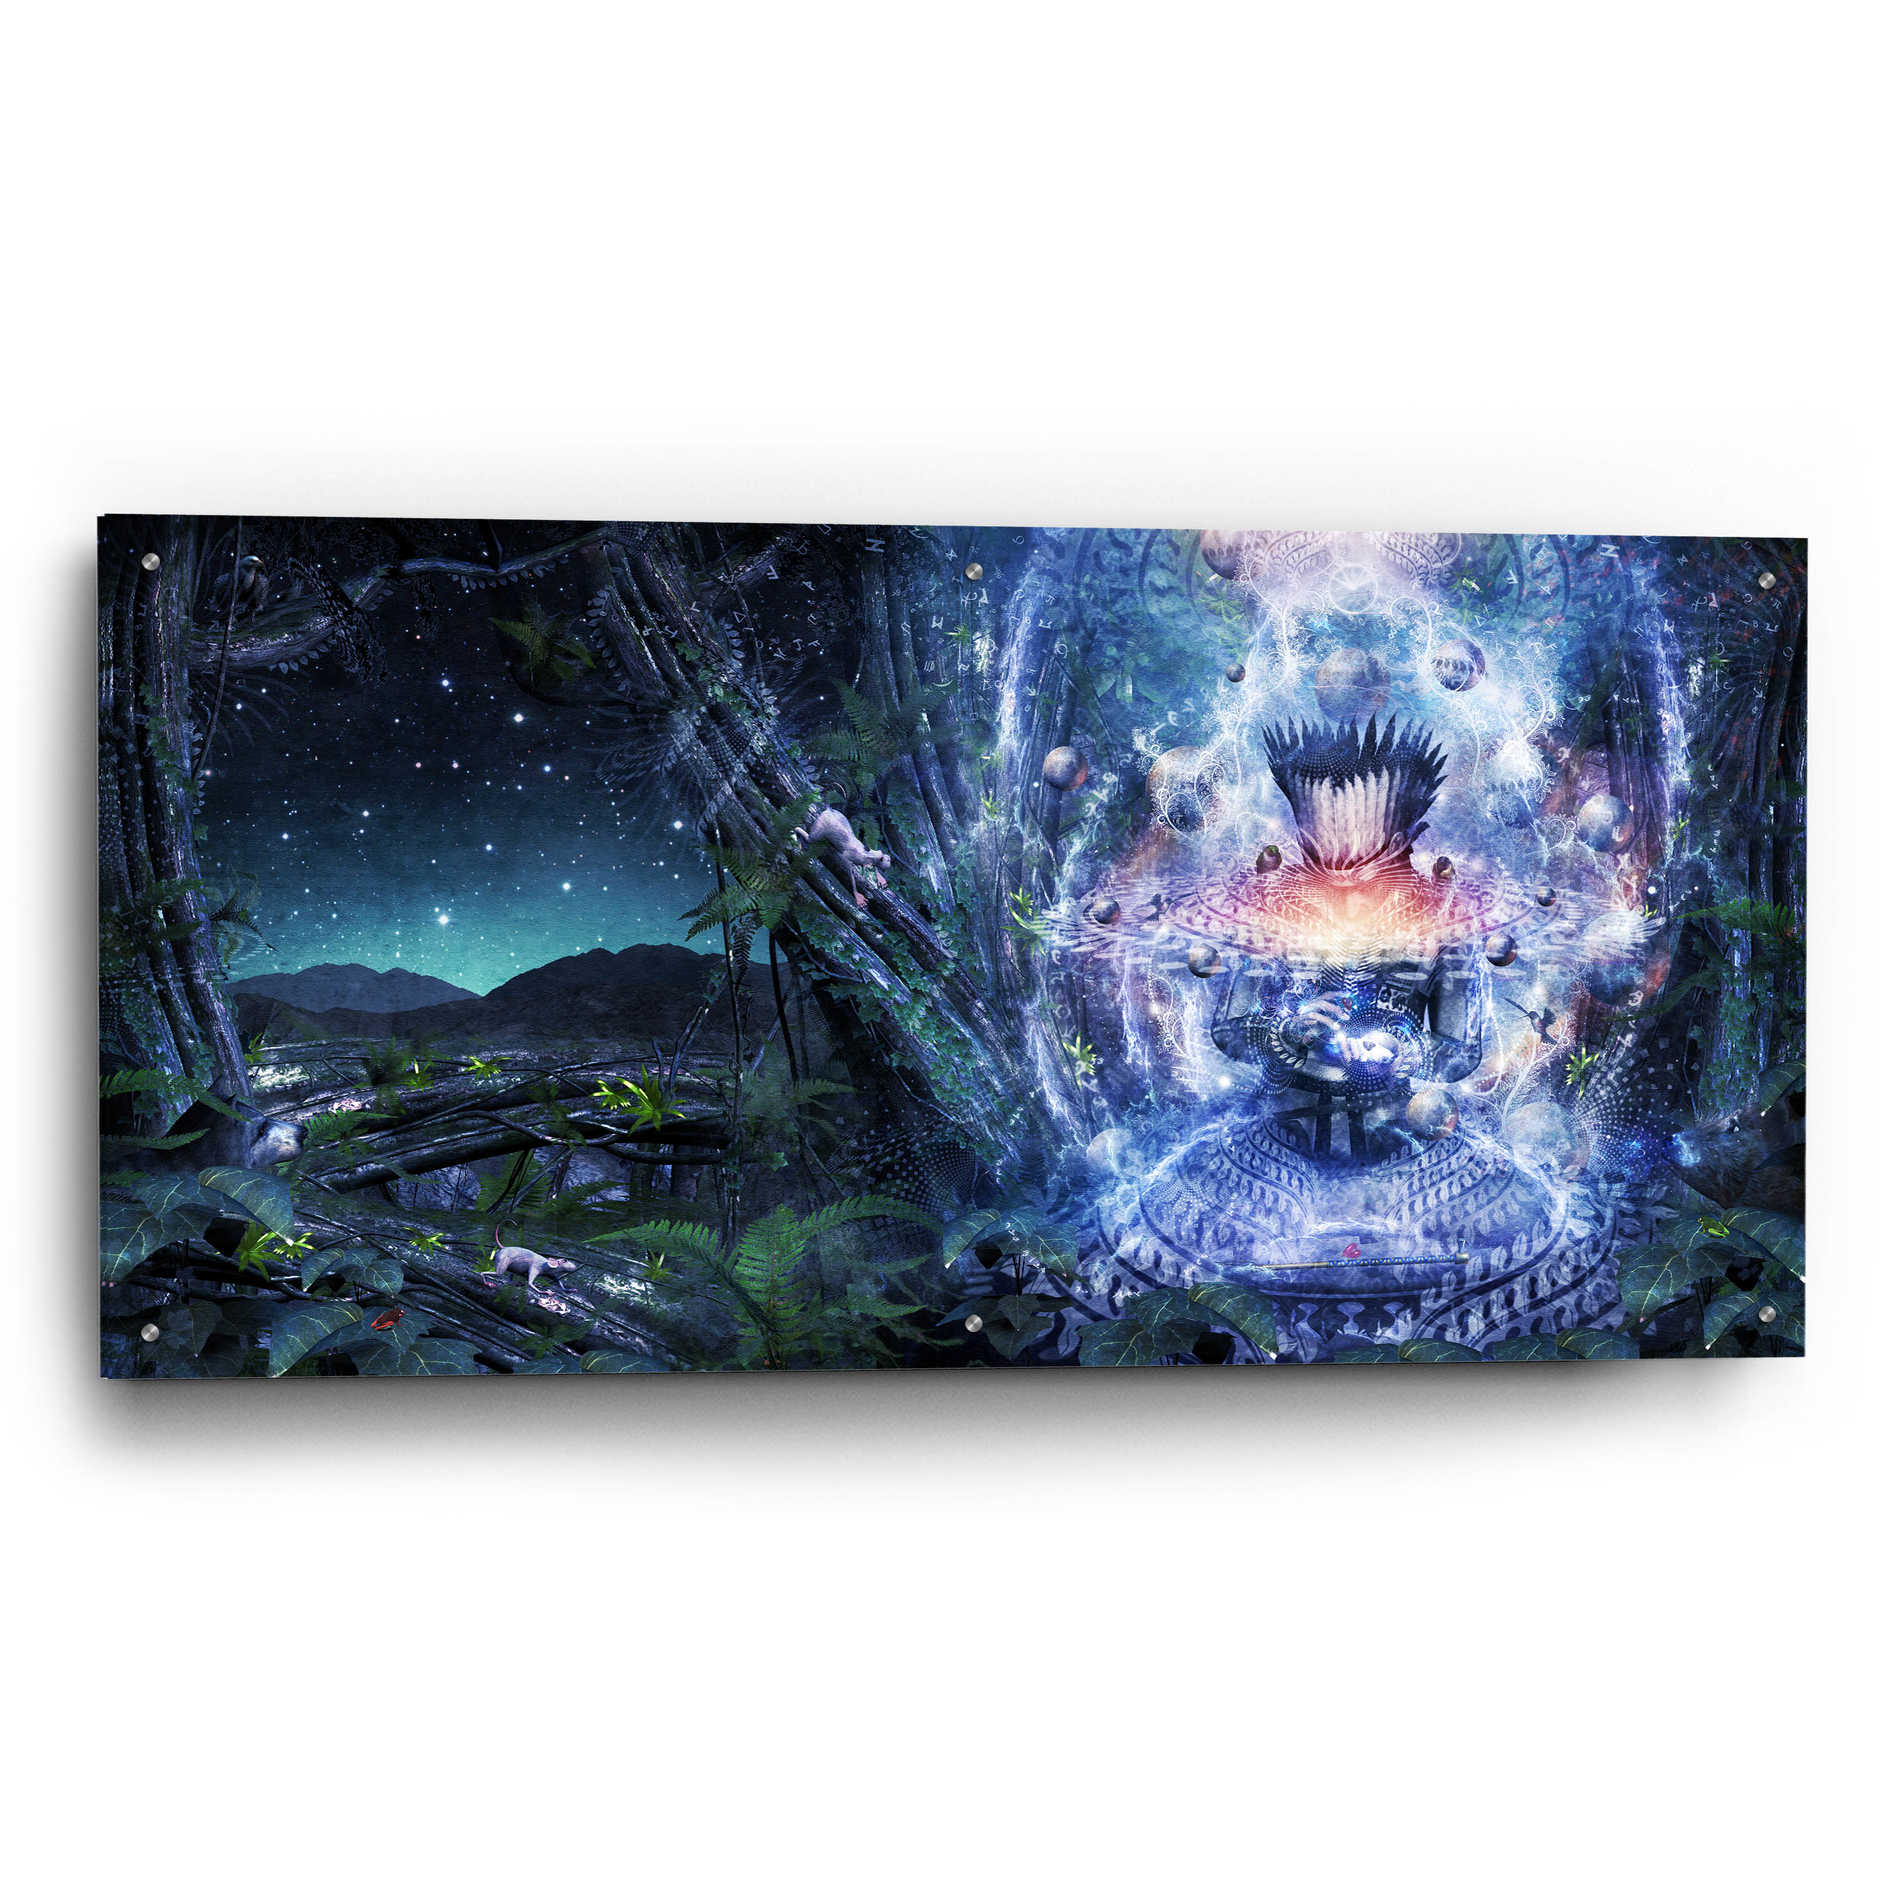 Epic Art 'From The Broken Grow The Saved' by Cameron Gray, Acrylic Glass Wall Art,48x24